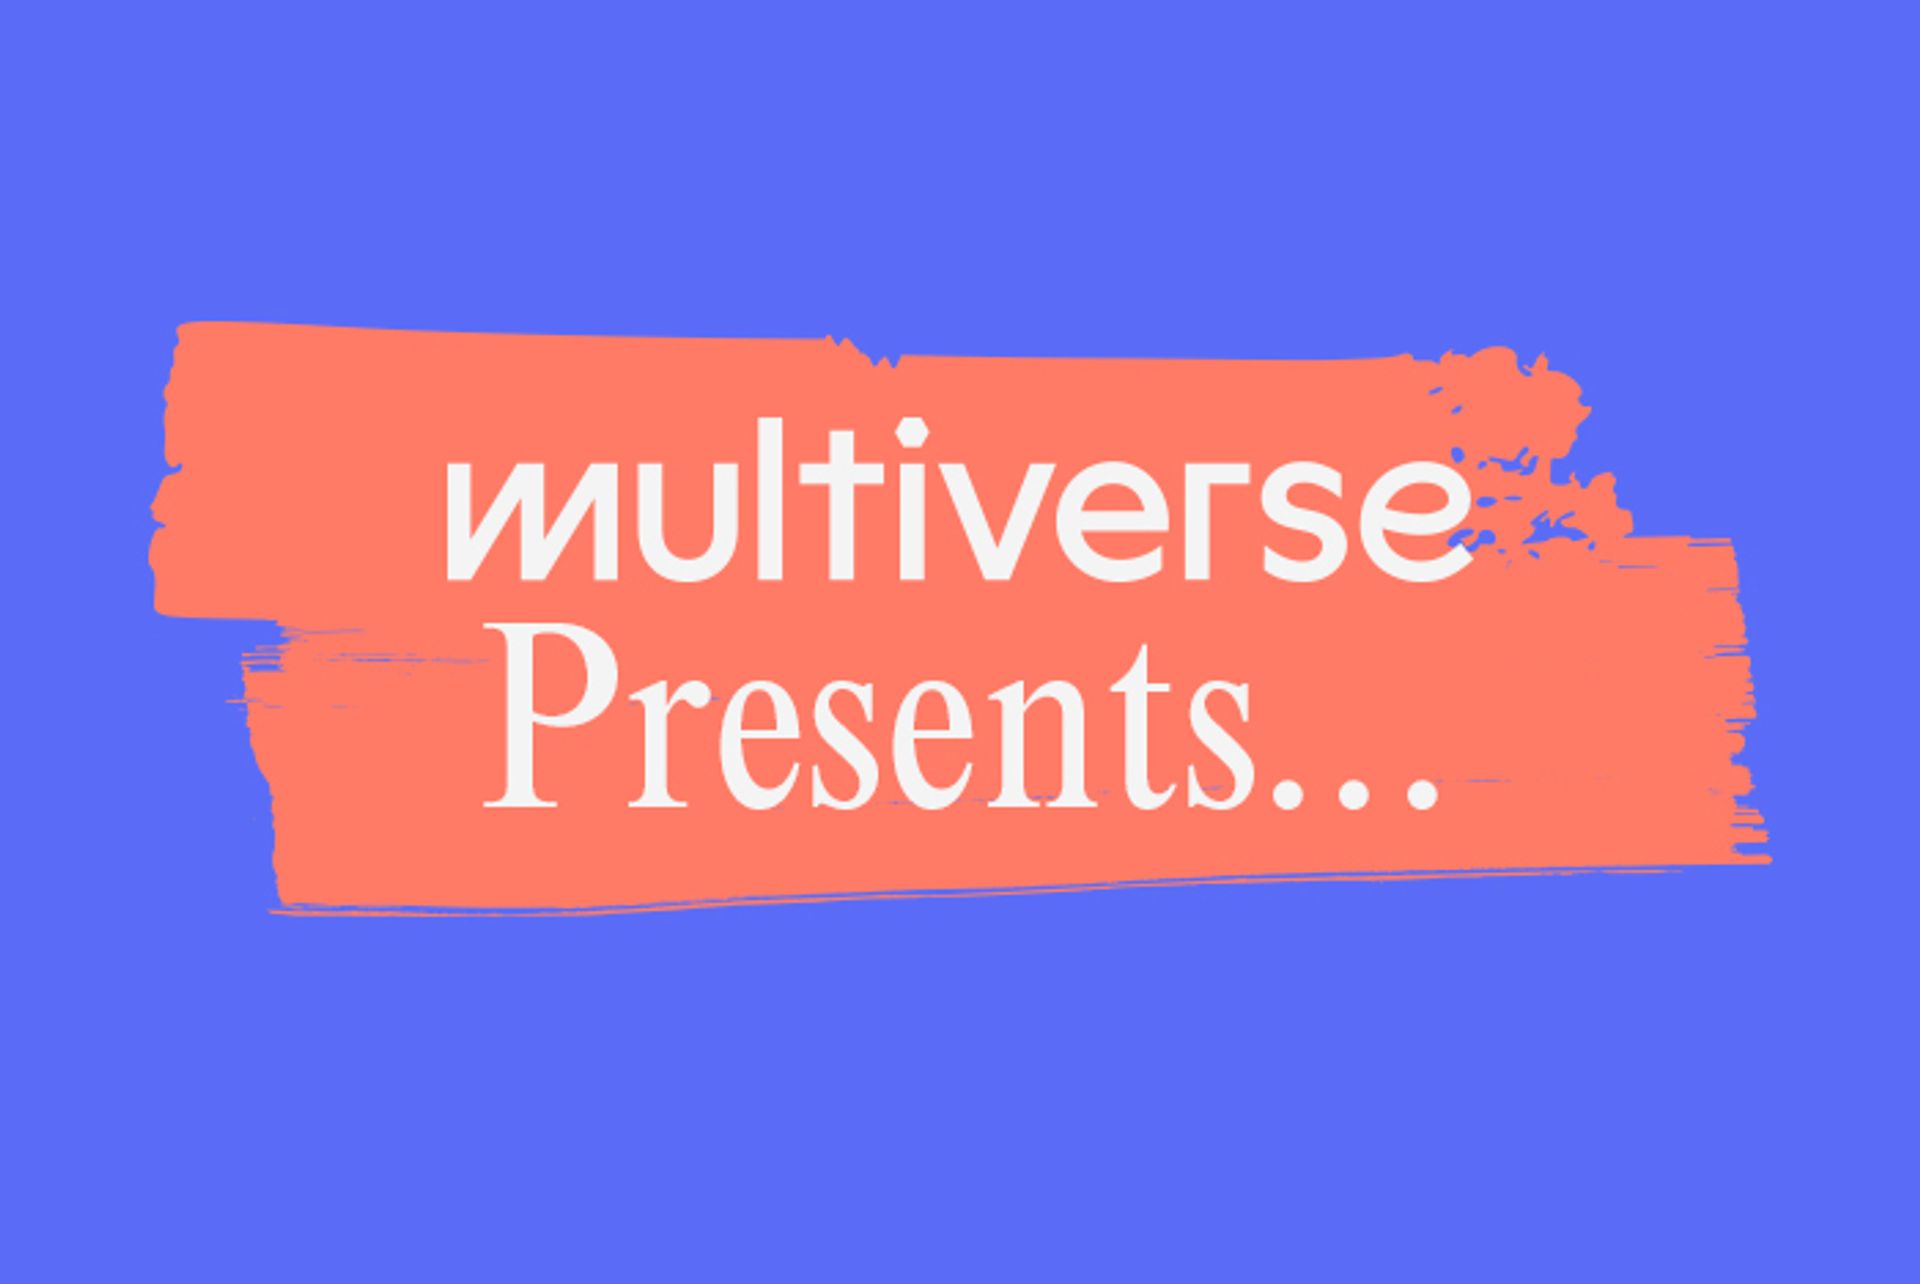 Multiverse Presents event imagery